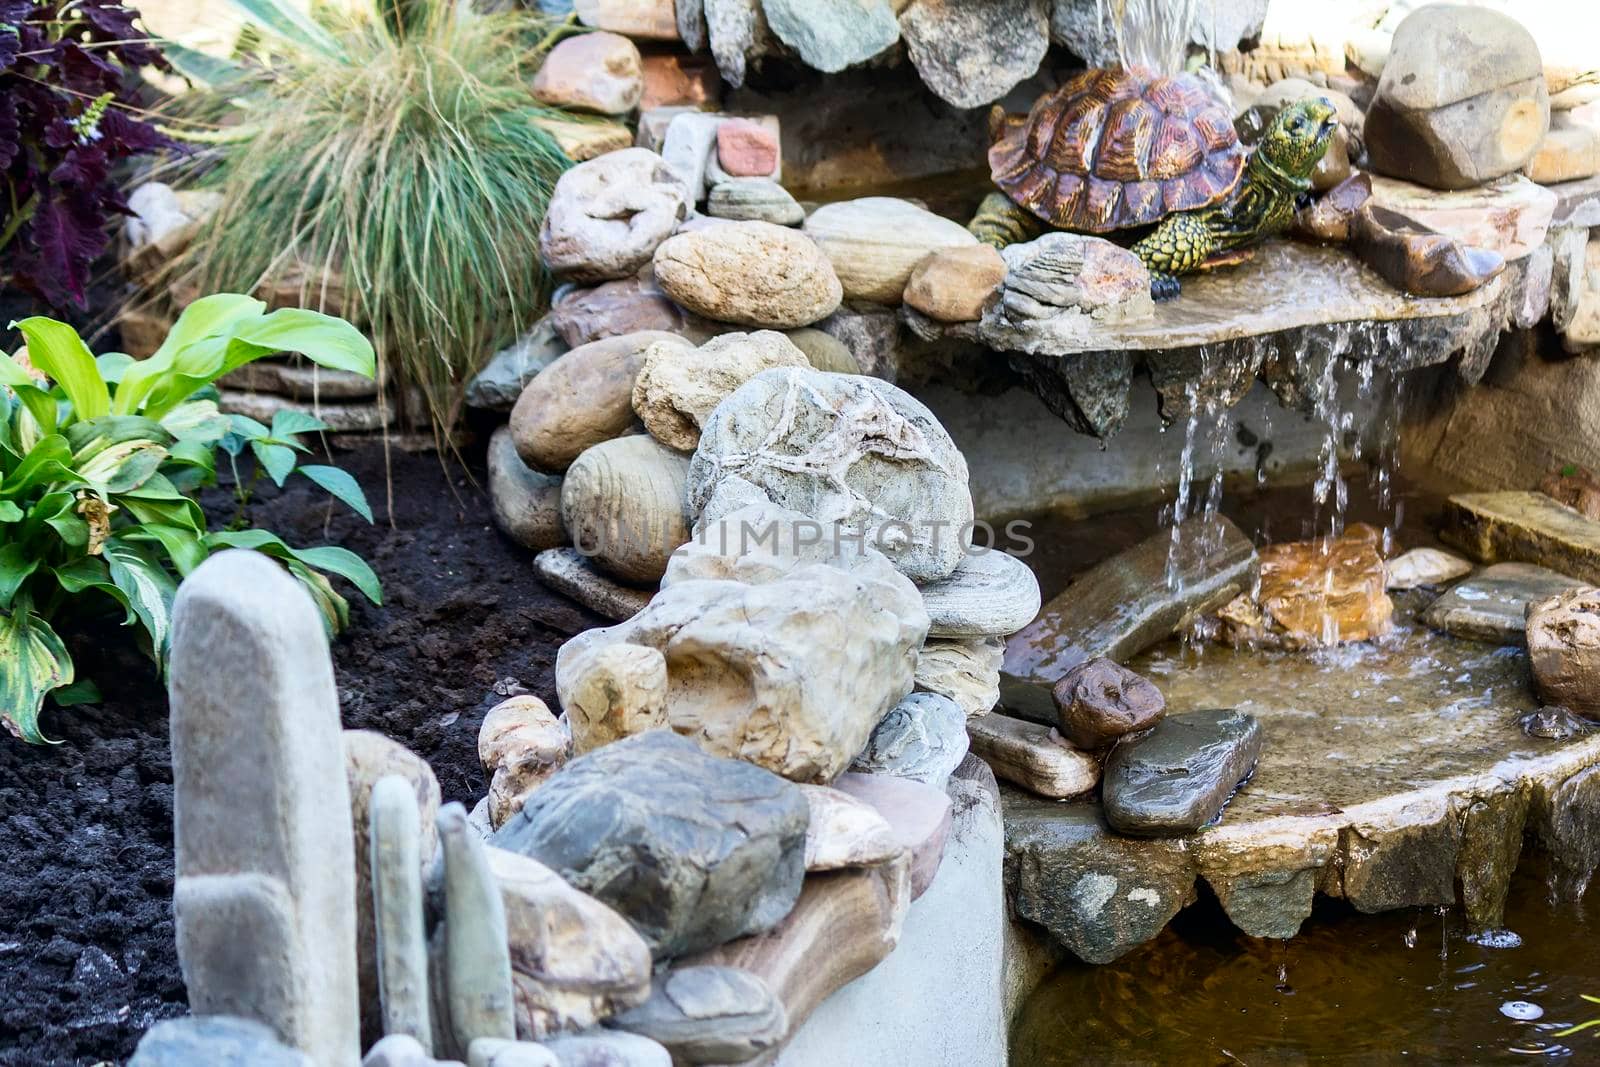 Small decorative pond with a beautiful stone wall and growing plants.